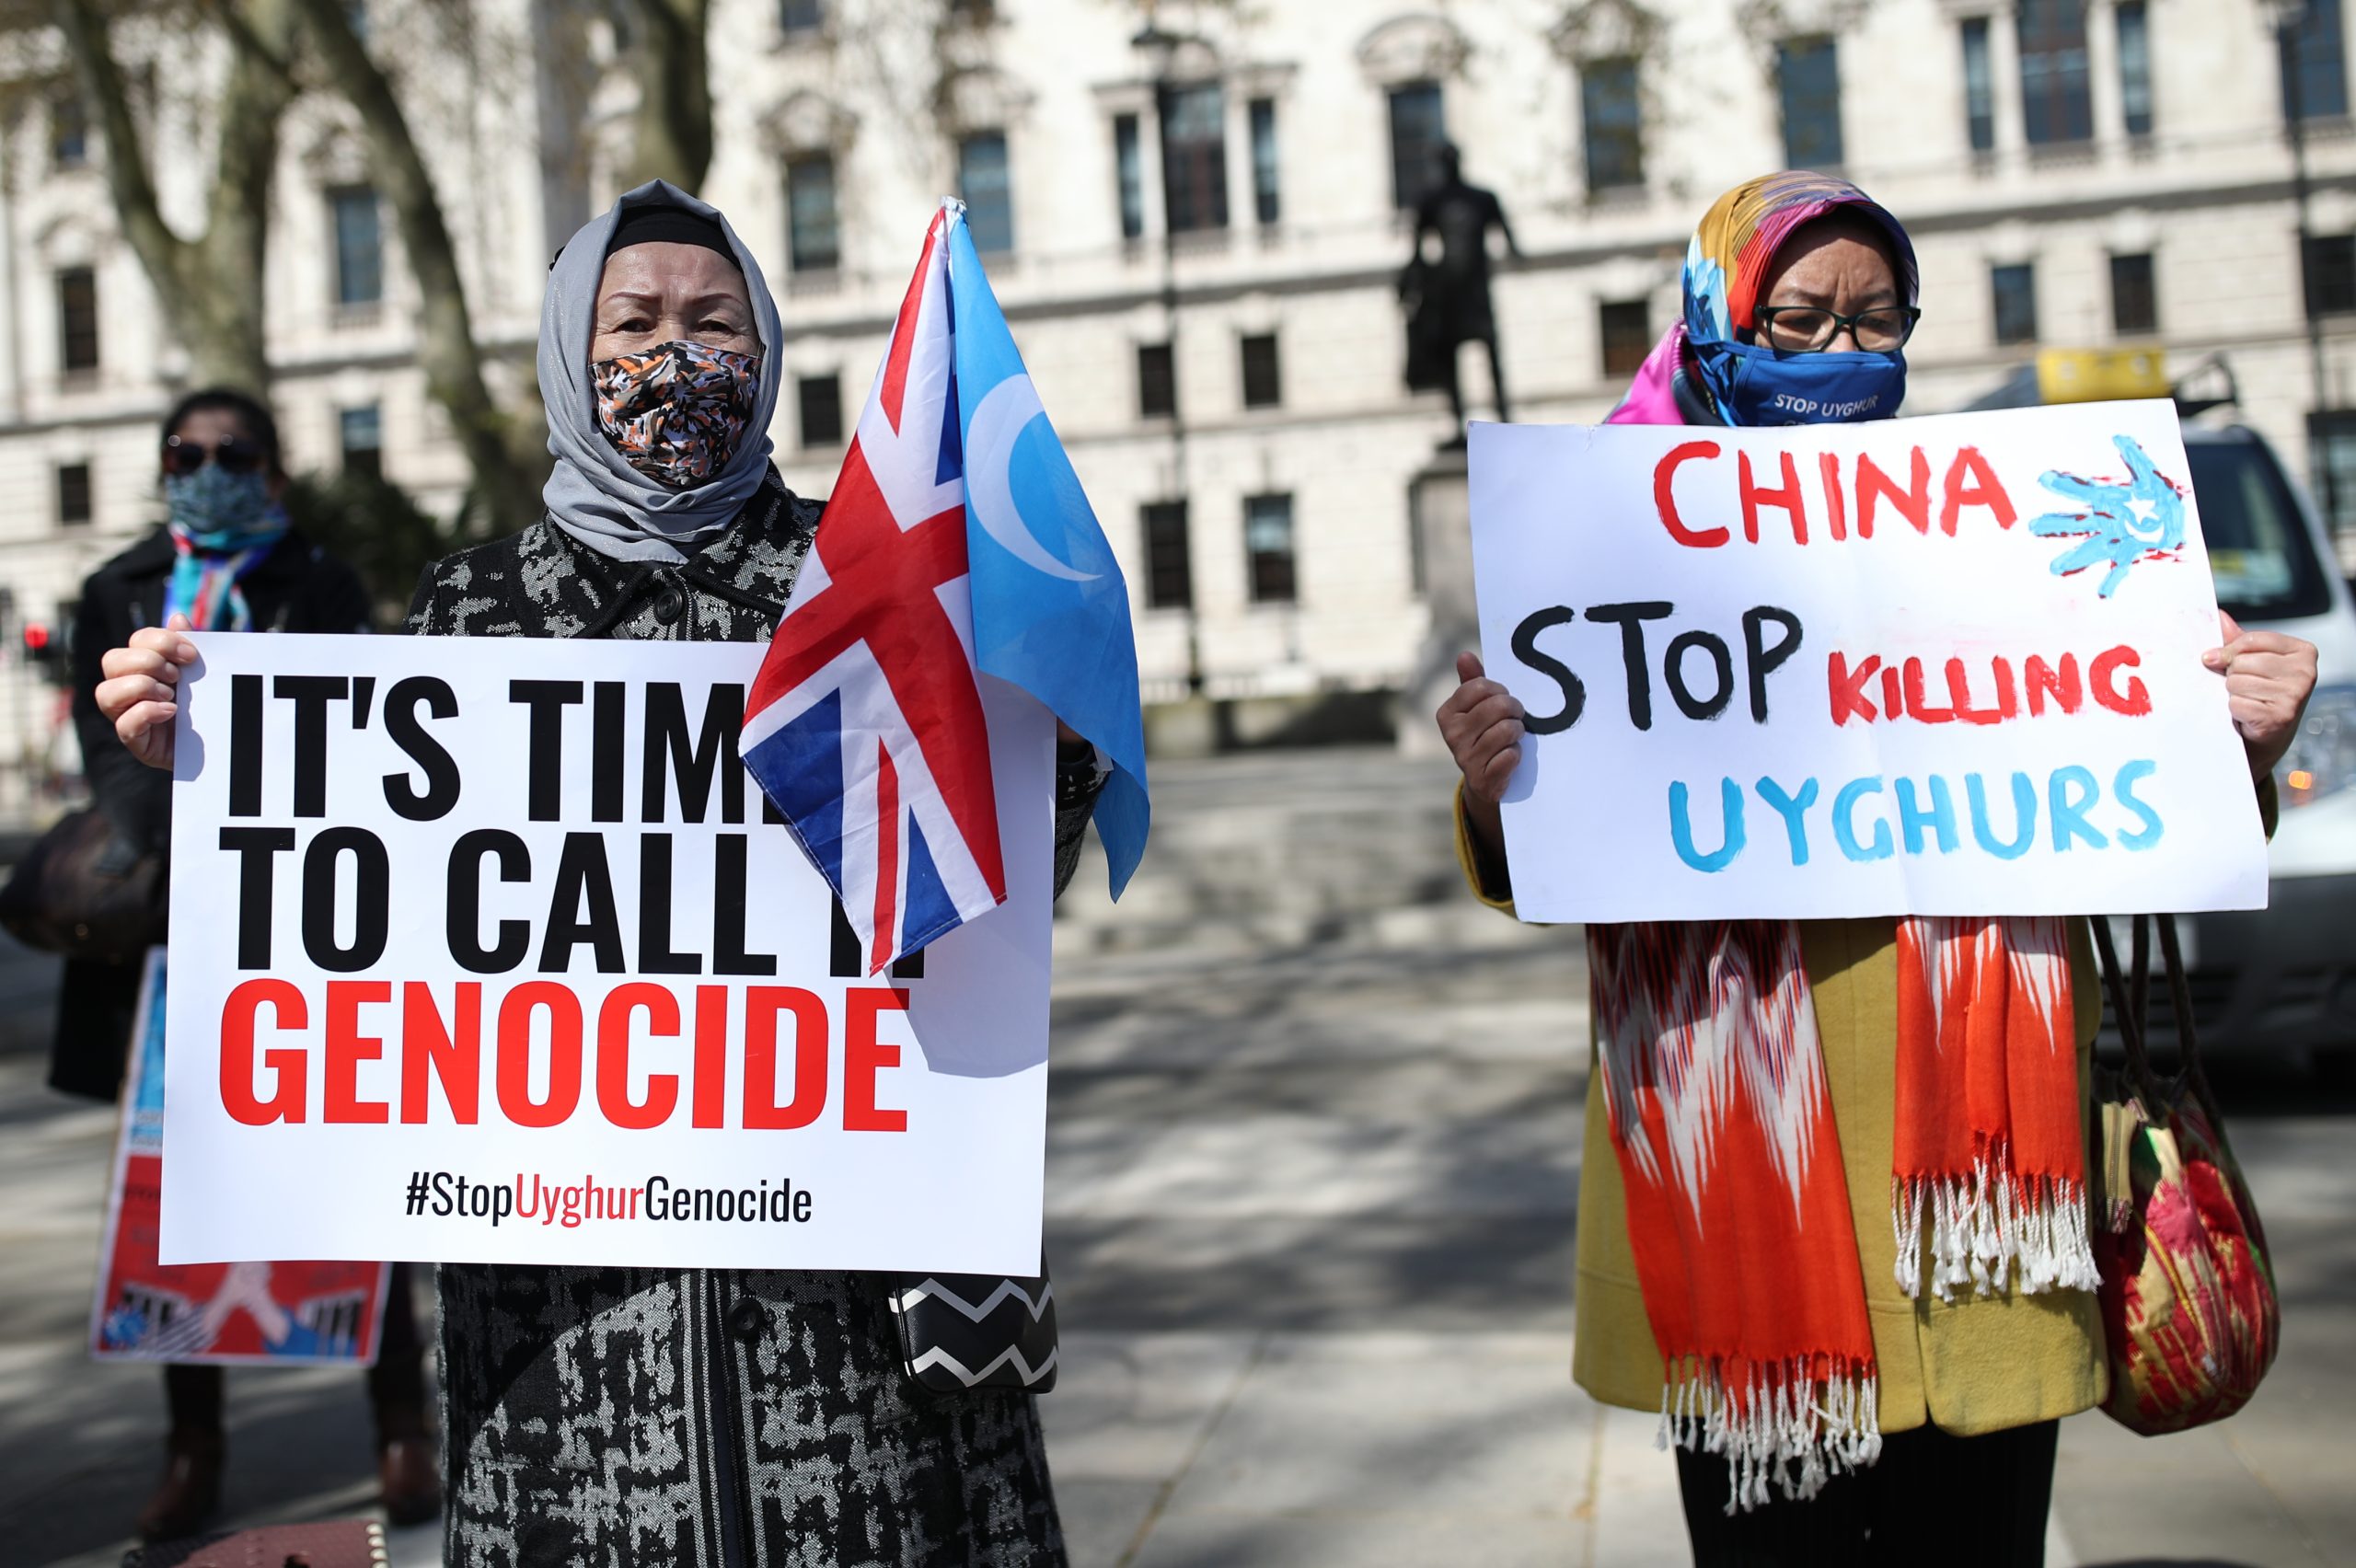 It’s unequivocal – the Chinese government is committing genocide. We must all act